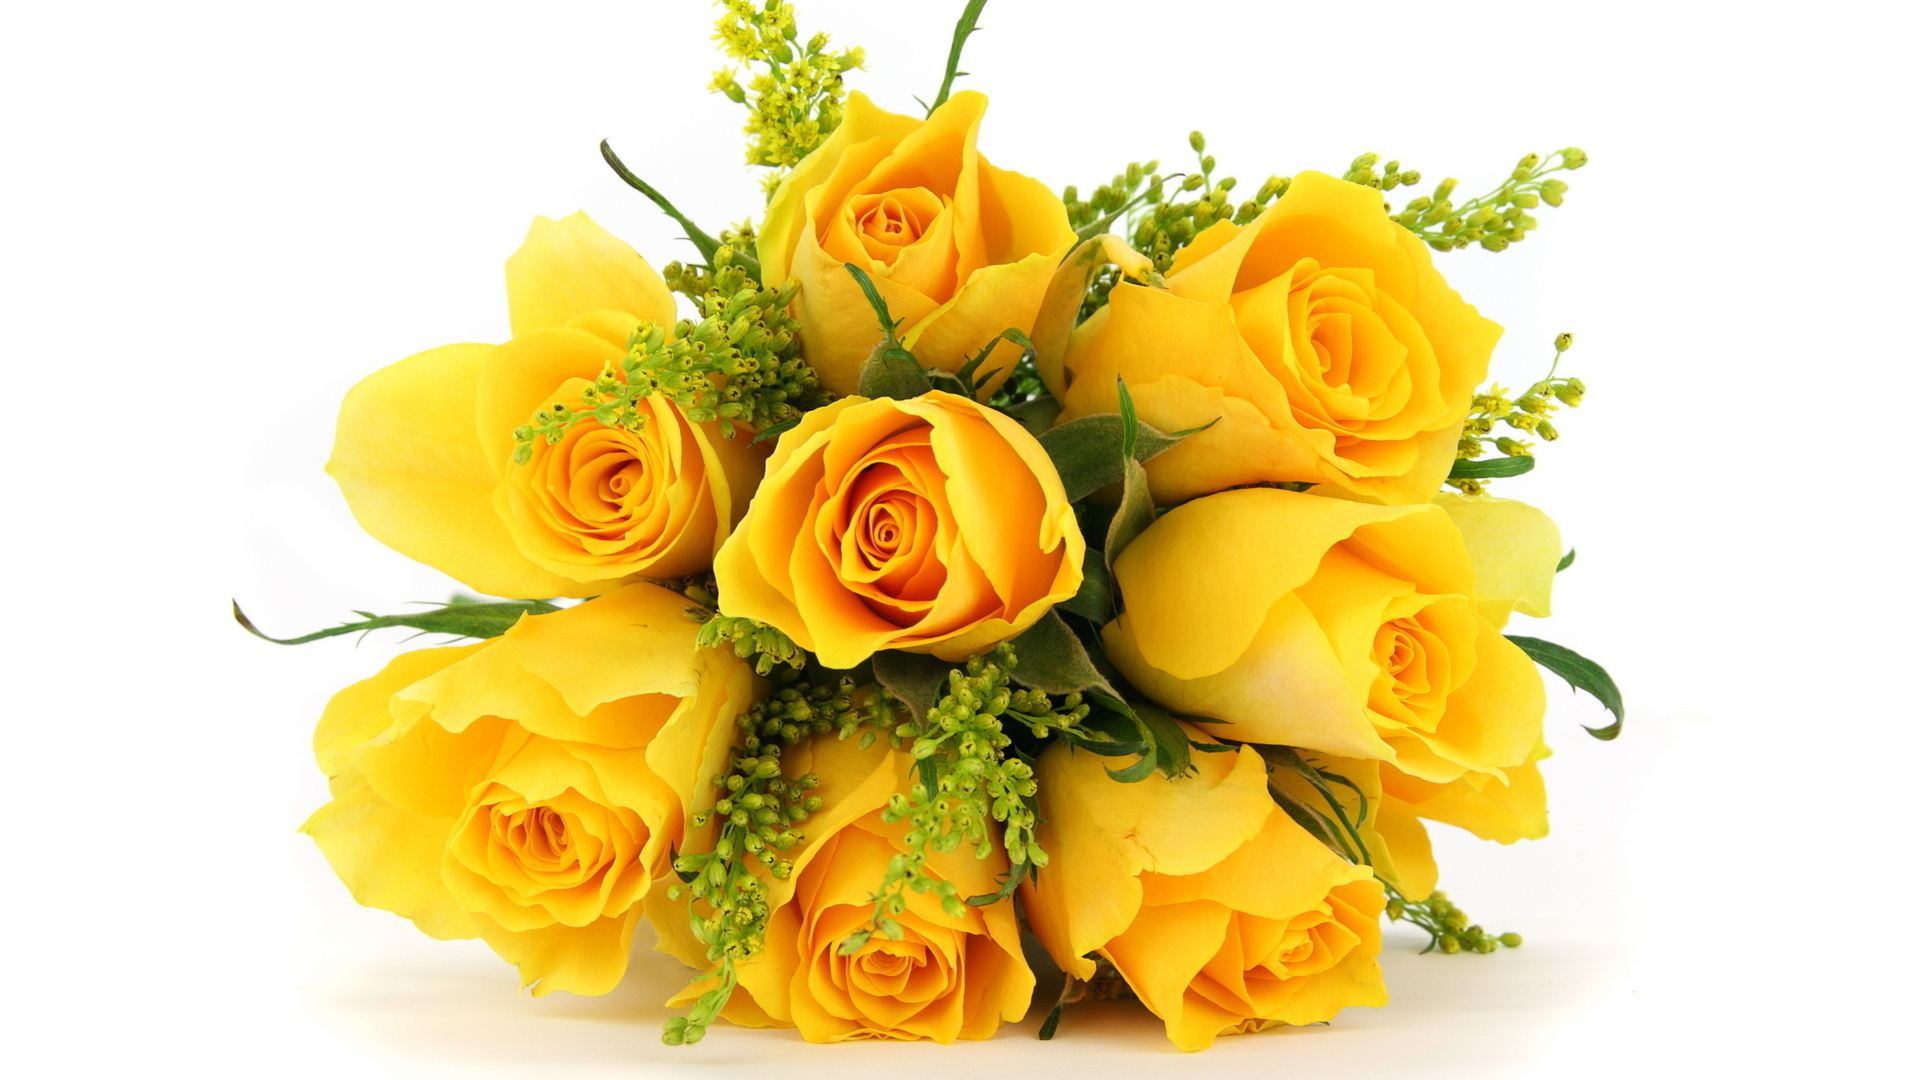 bouquet, earth, rose, flower, nature, yellow flower, yellow rose, flowers